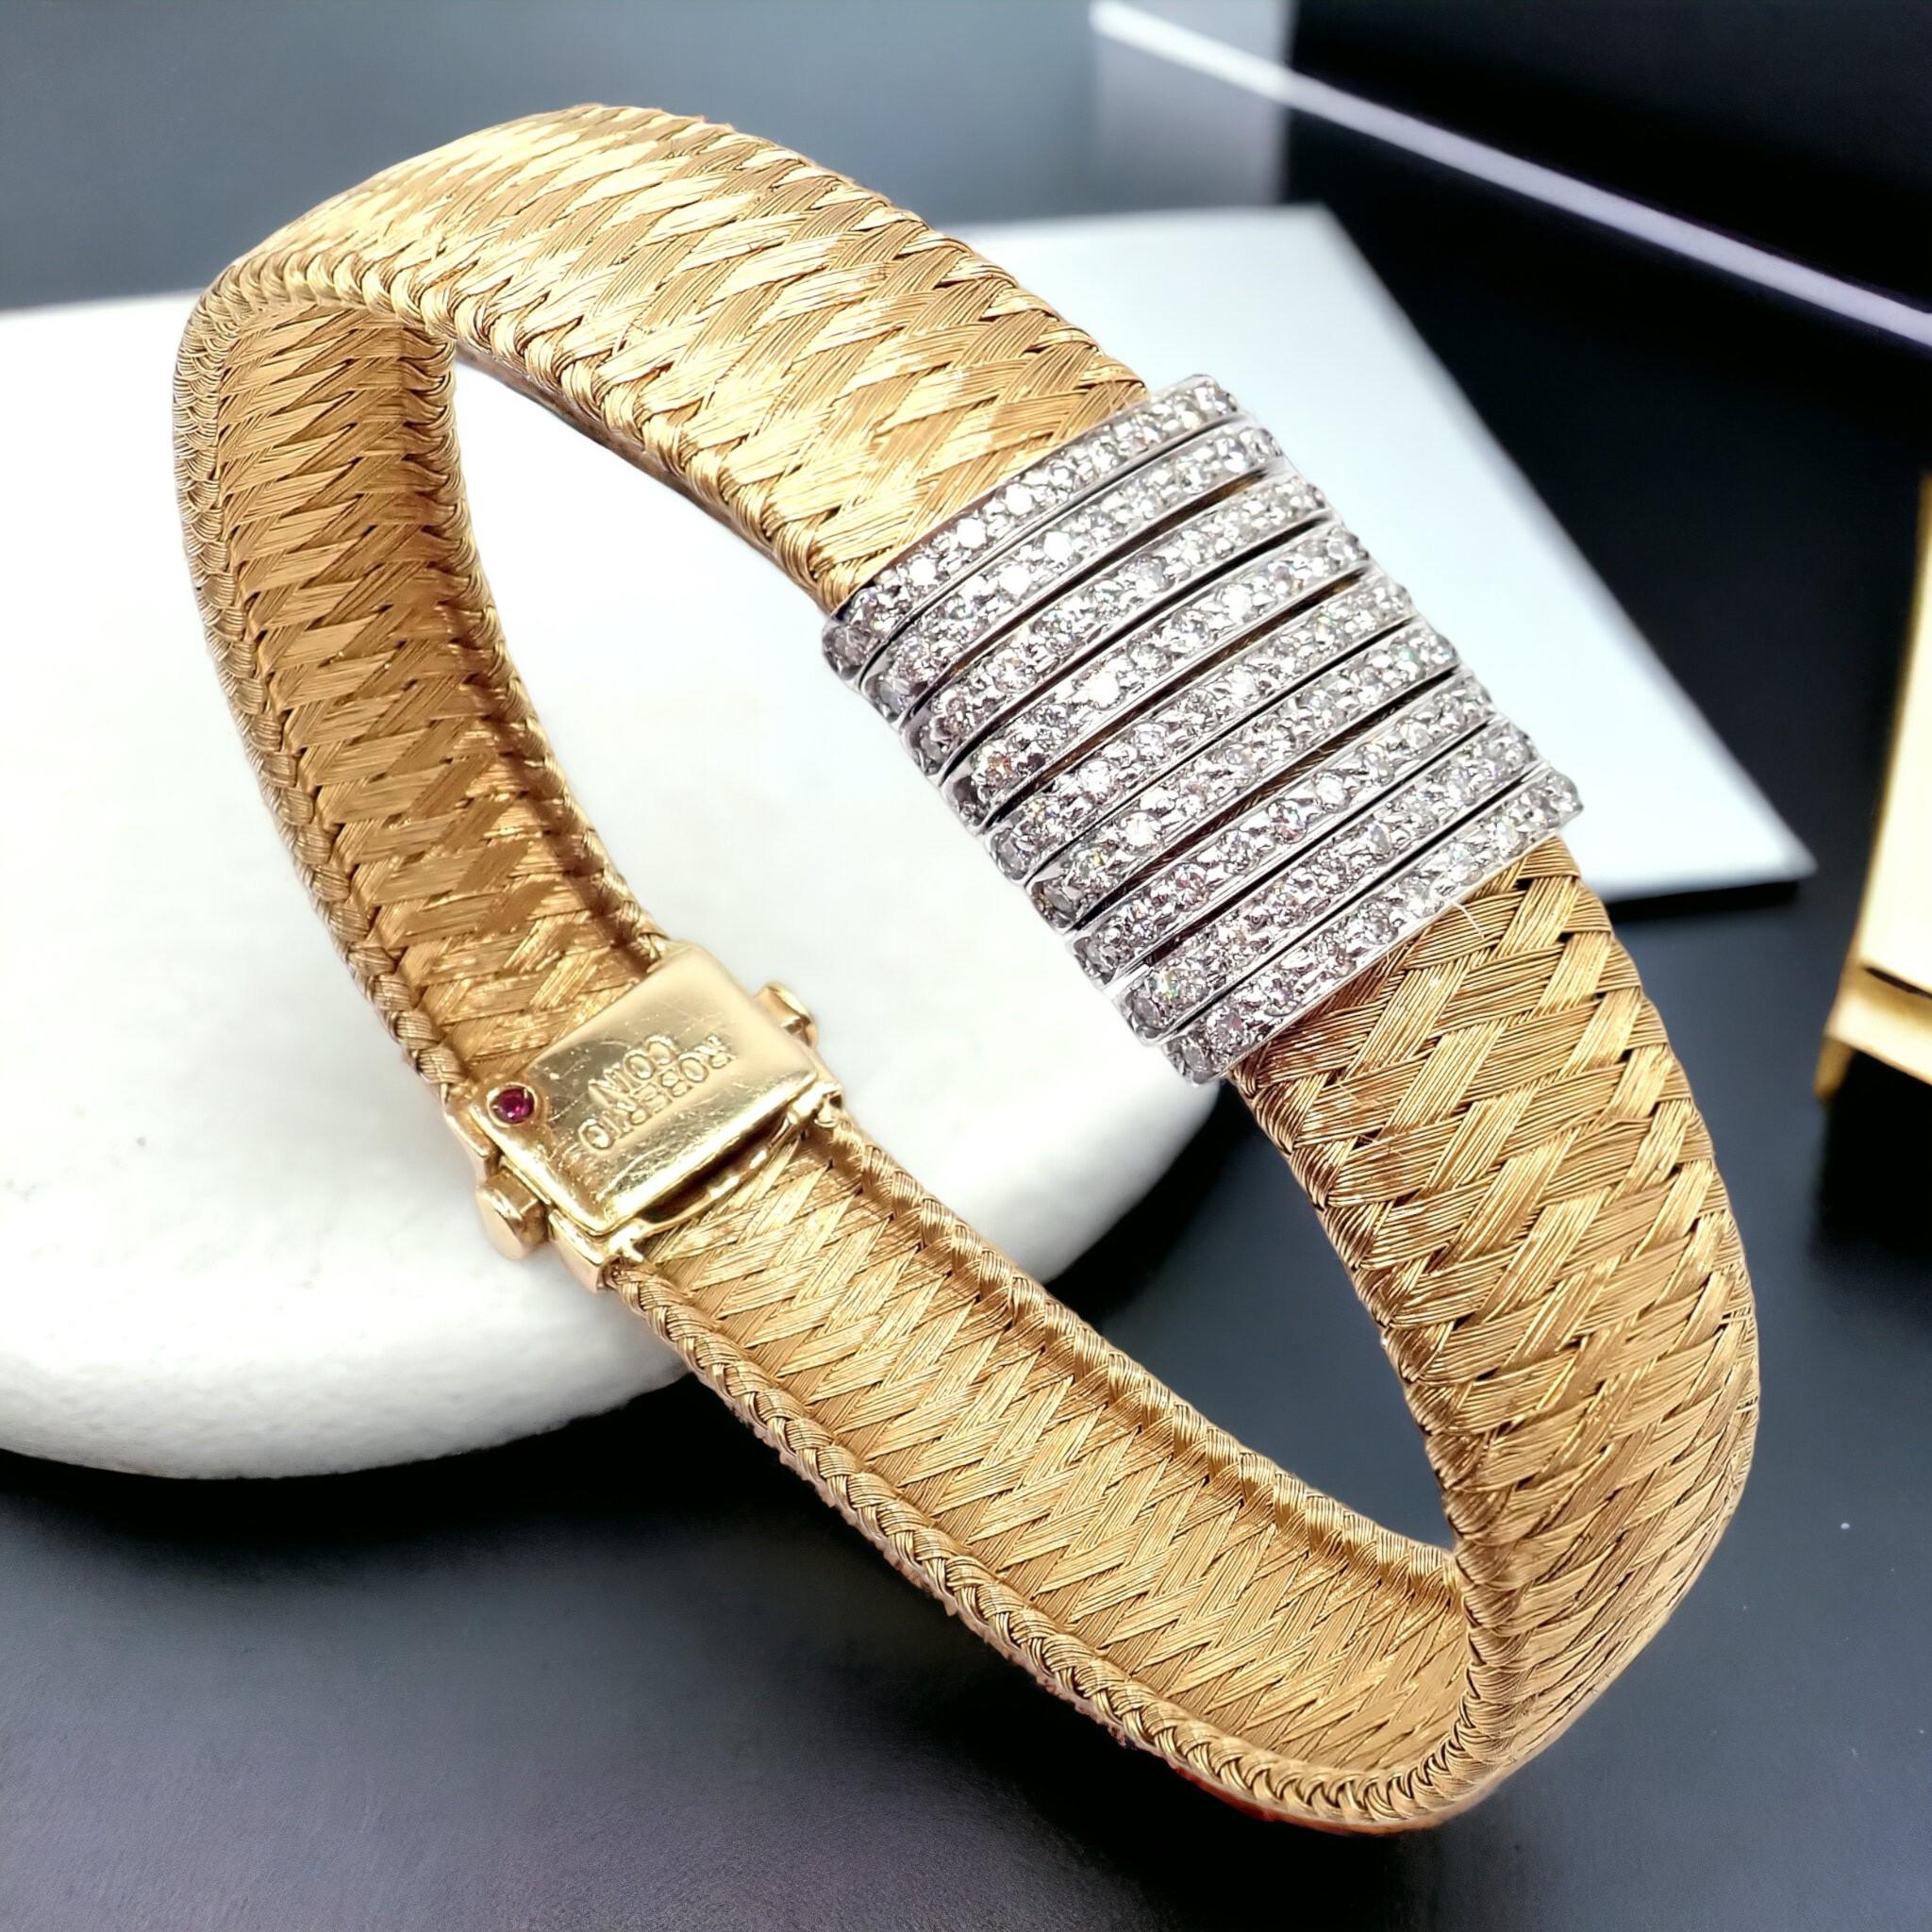 The Roberto Coin 18k Yellow Gold 9 Row Diamond Silk Weave Bracelet is an exquisite piece of jewelry. It features nine rows of diamonds set in 18k white gold bars. These bars are set on a basketweave design to resemble silk, entirely crafted from 18k